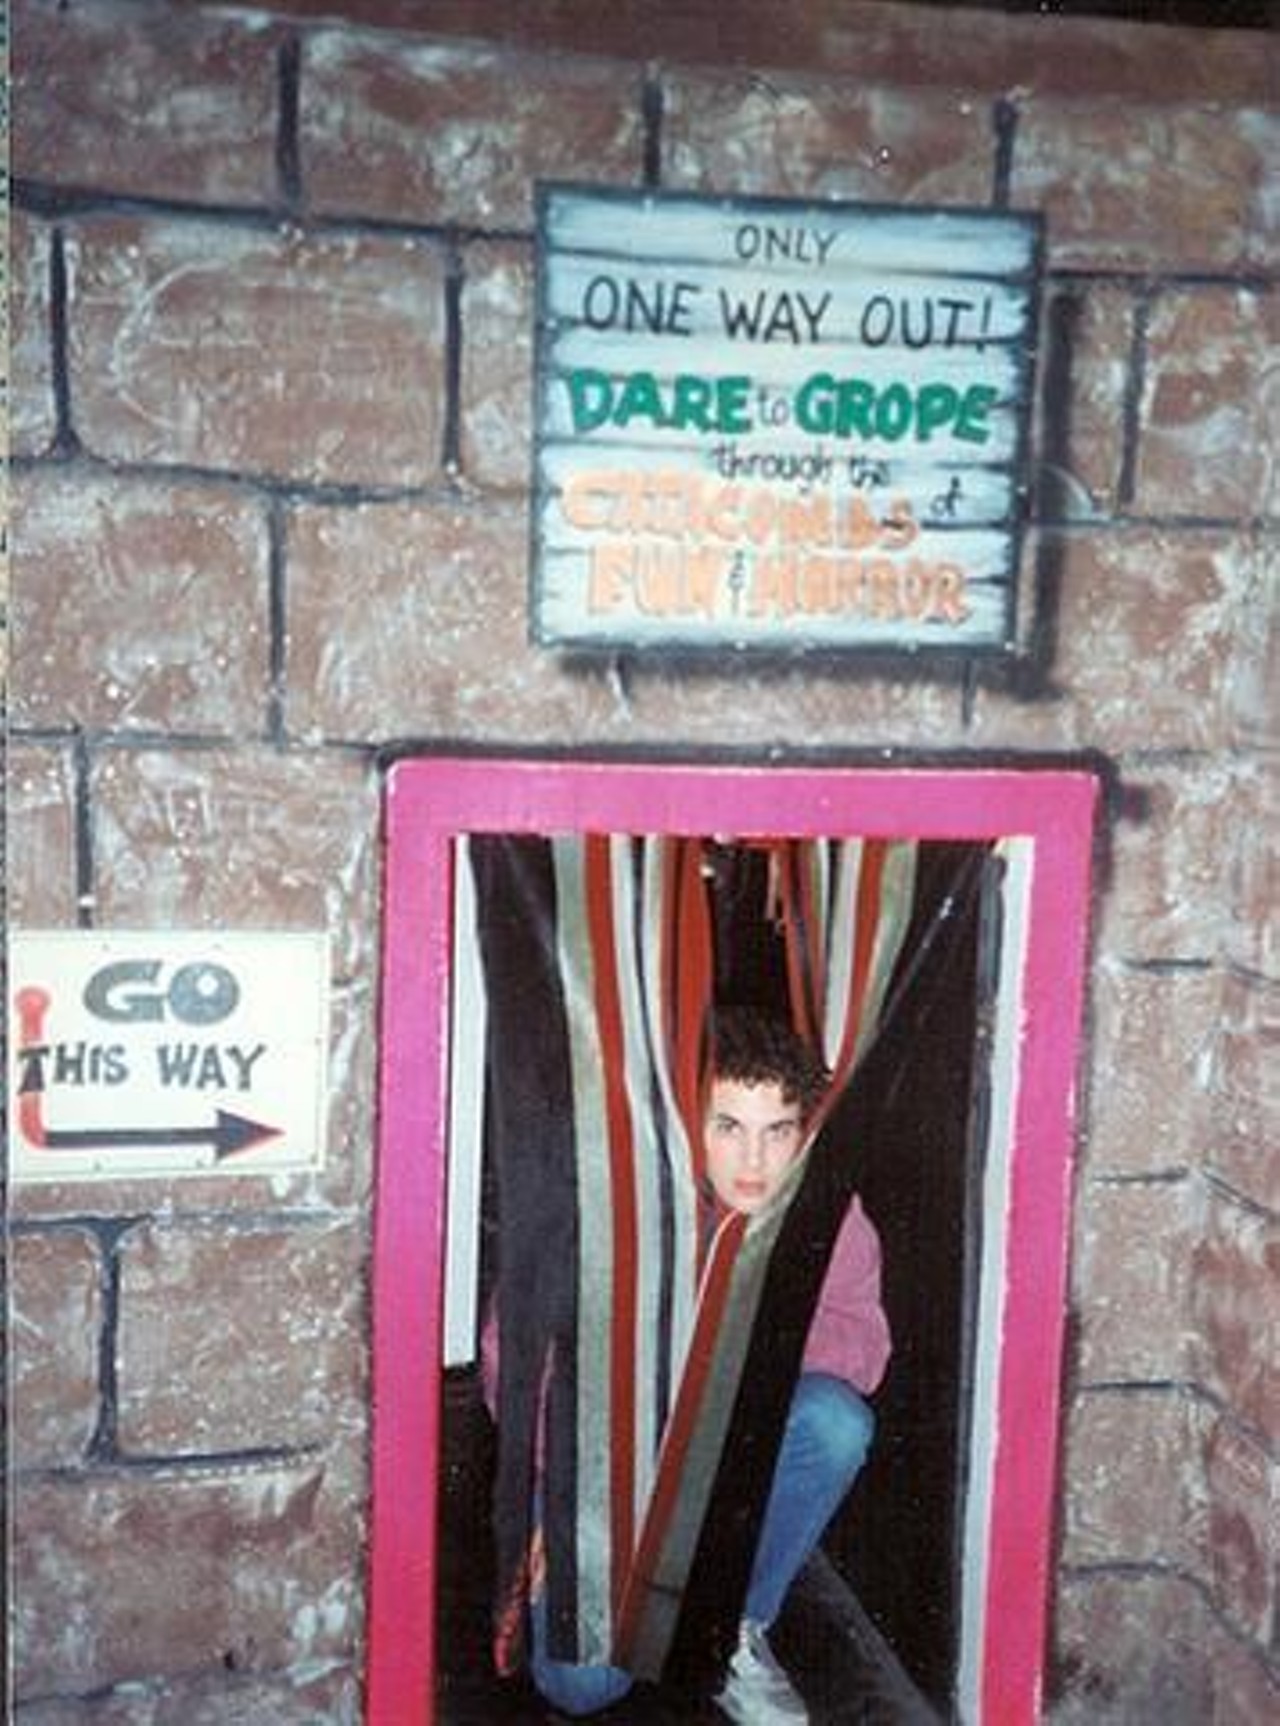 There was only one way out, and you had to grope your way to the exit. (image via bigfloridacountry.com)